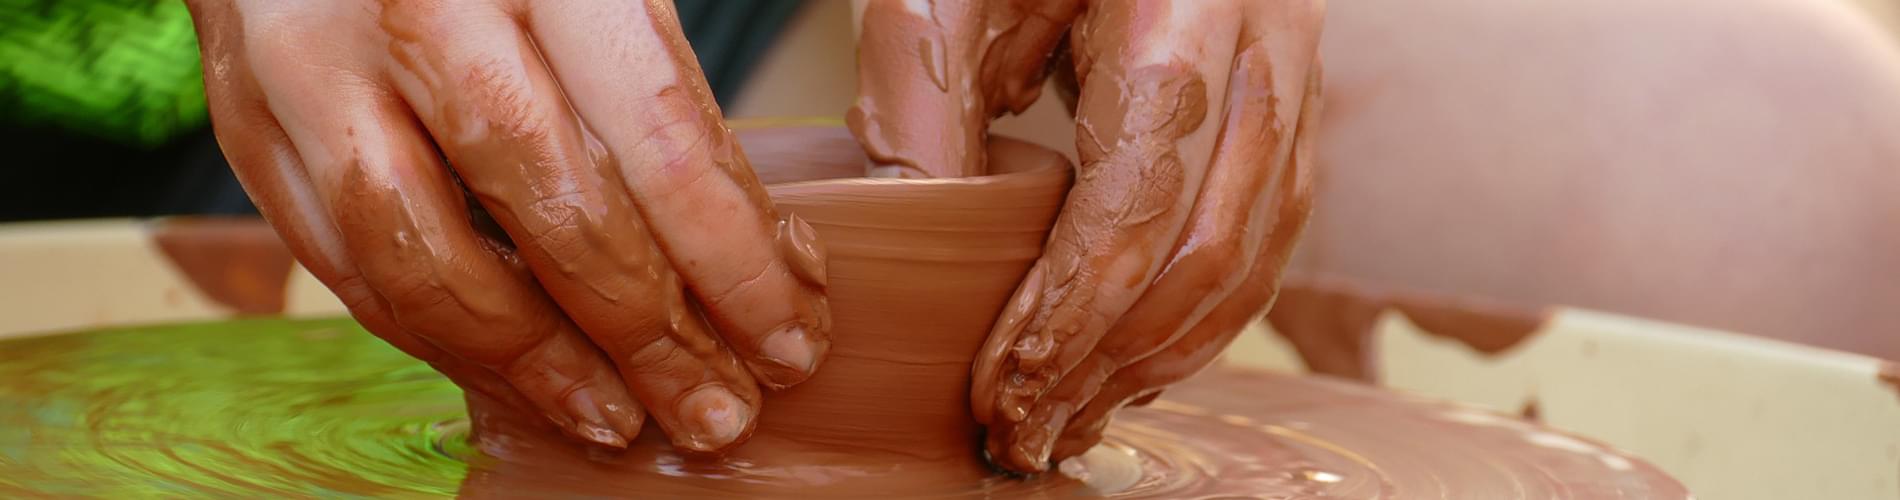 Young person sits over a pottery wheel, crafting a small pot with wet clay.